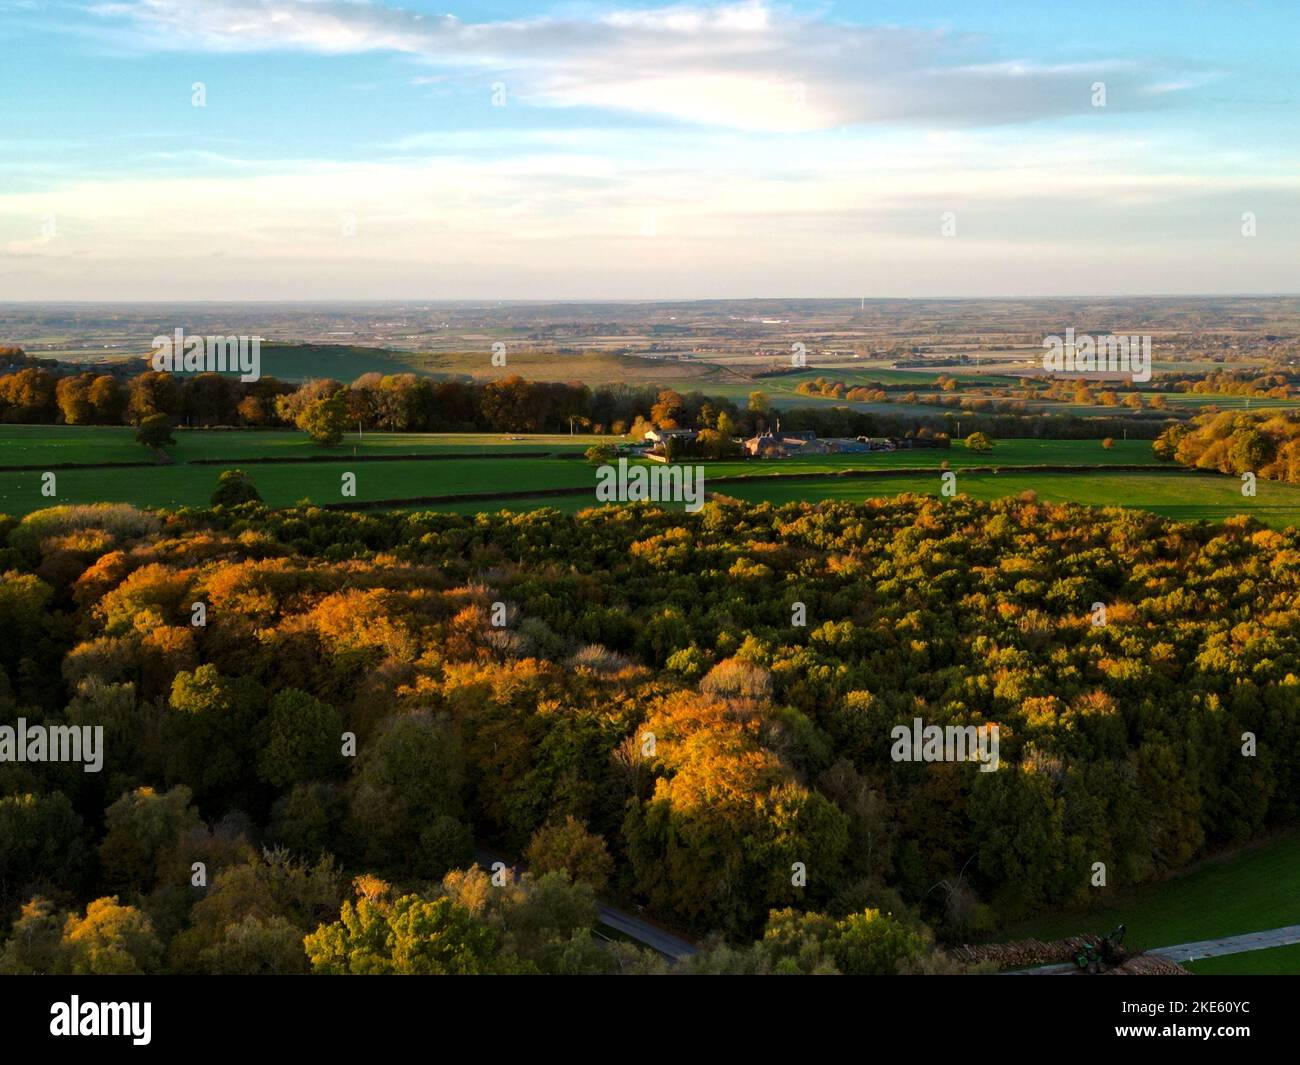 An aerial view of autumn woodlands in Ashridge, England Stock Photo